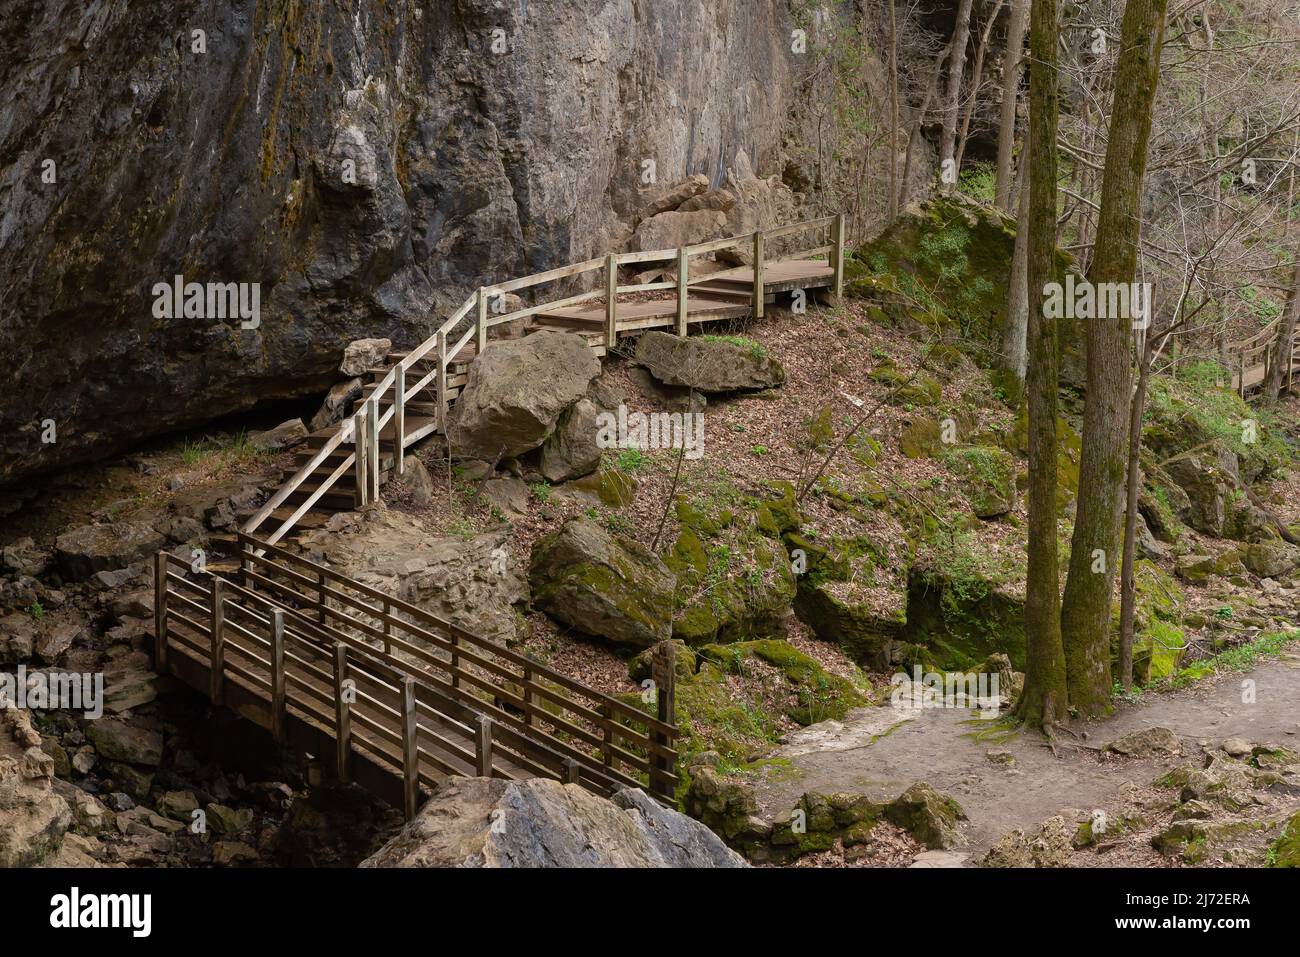 Wooden walkway along the cave walls at the entrance of the Lower Dancehall Cave.  Maquoketa Caves State Park, Iowa, USA. Stock Photo